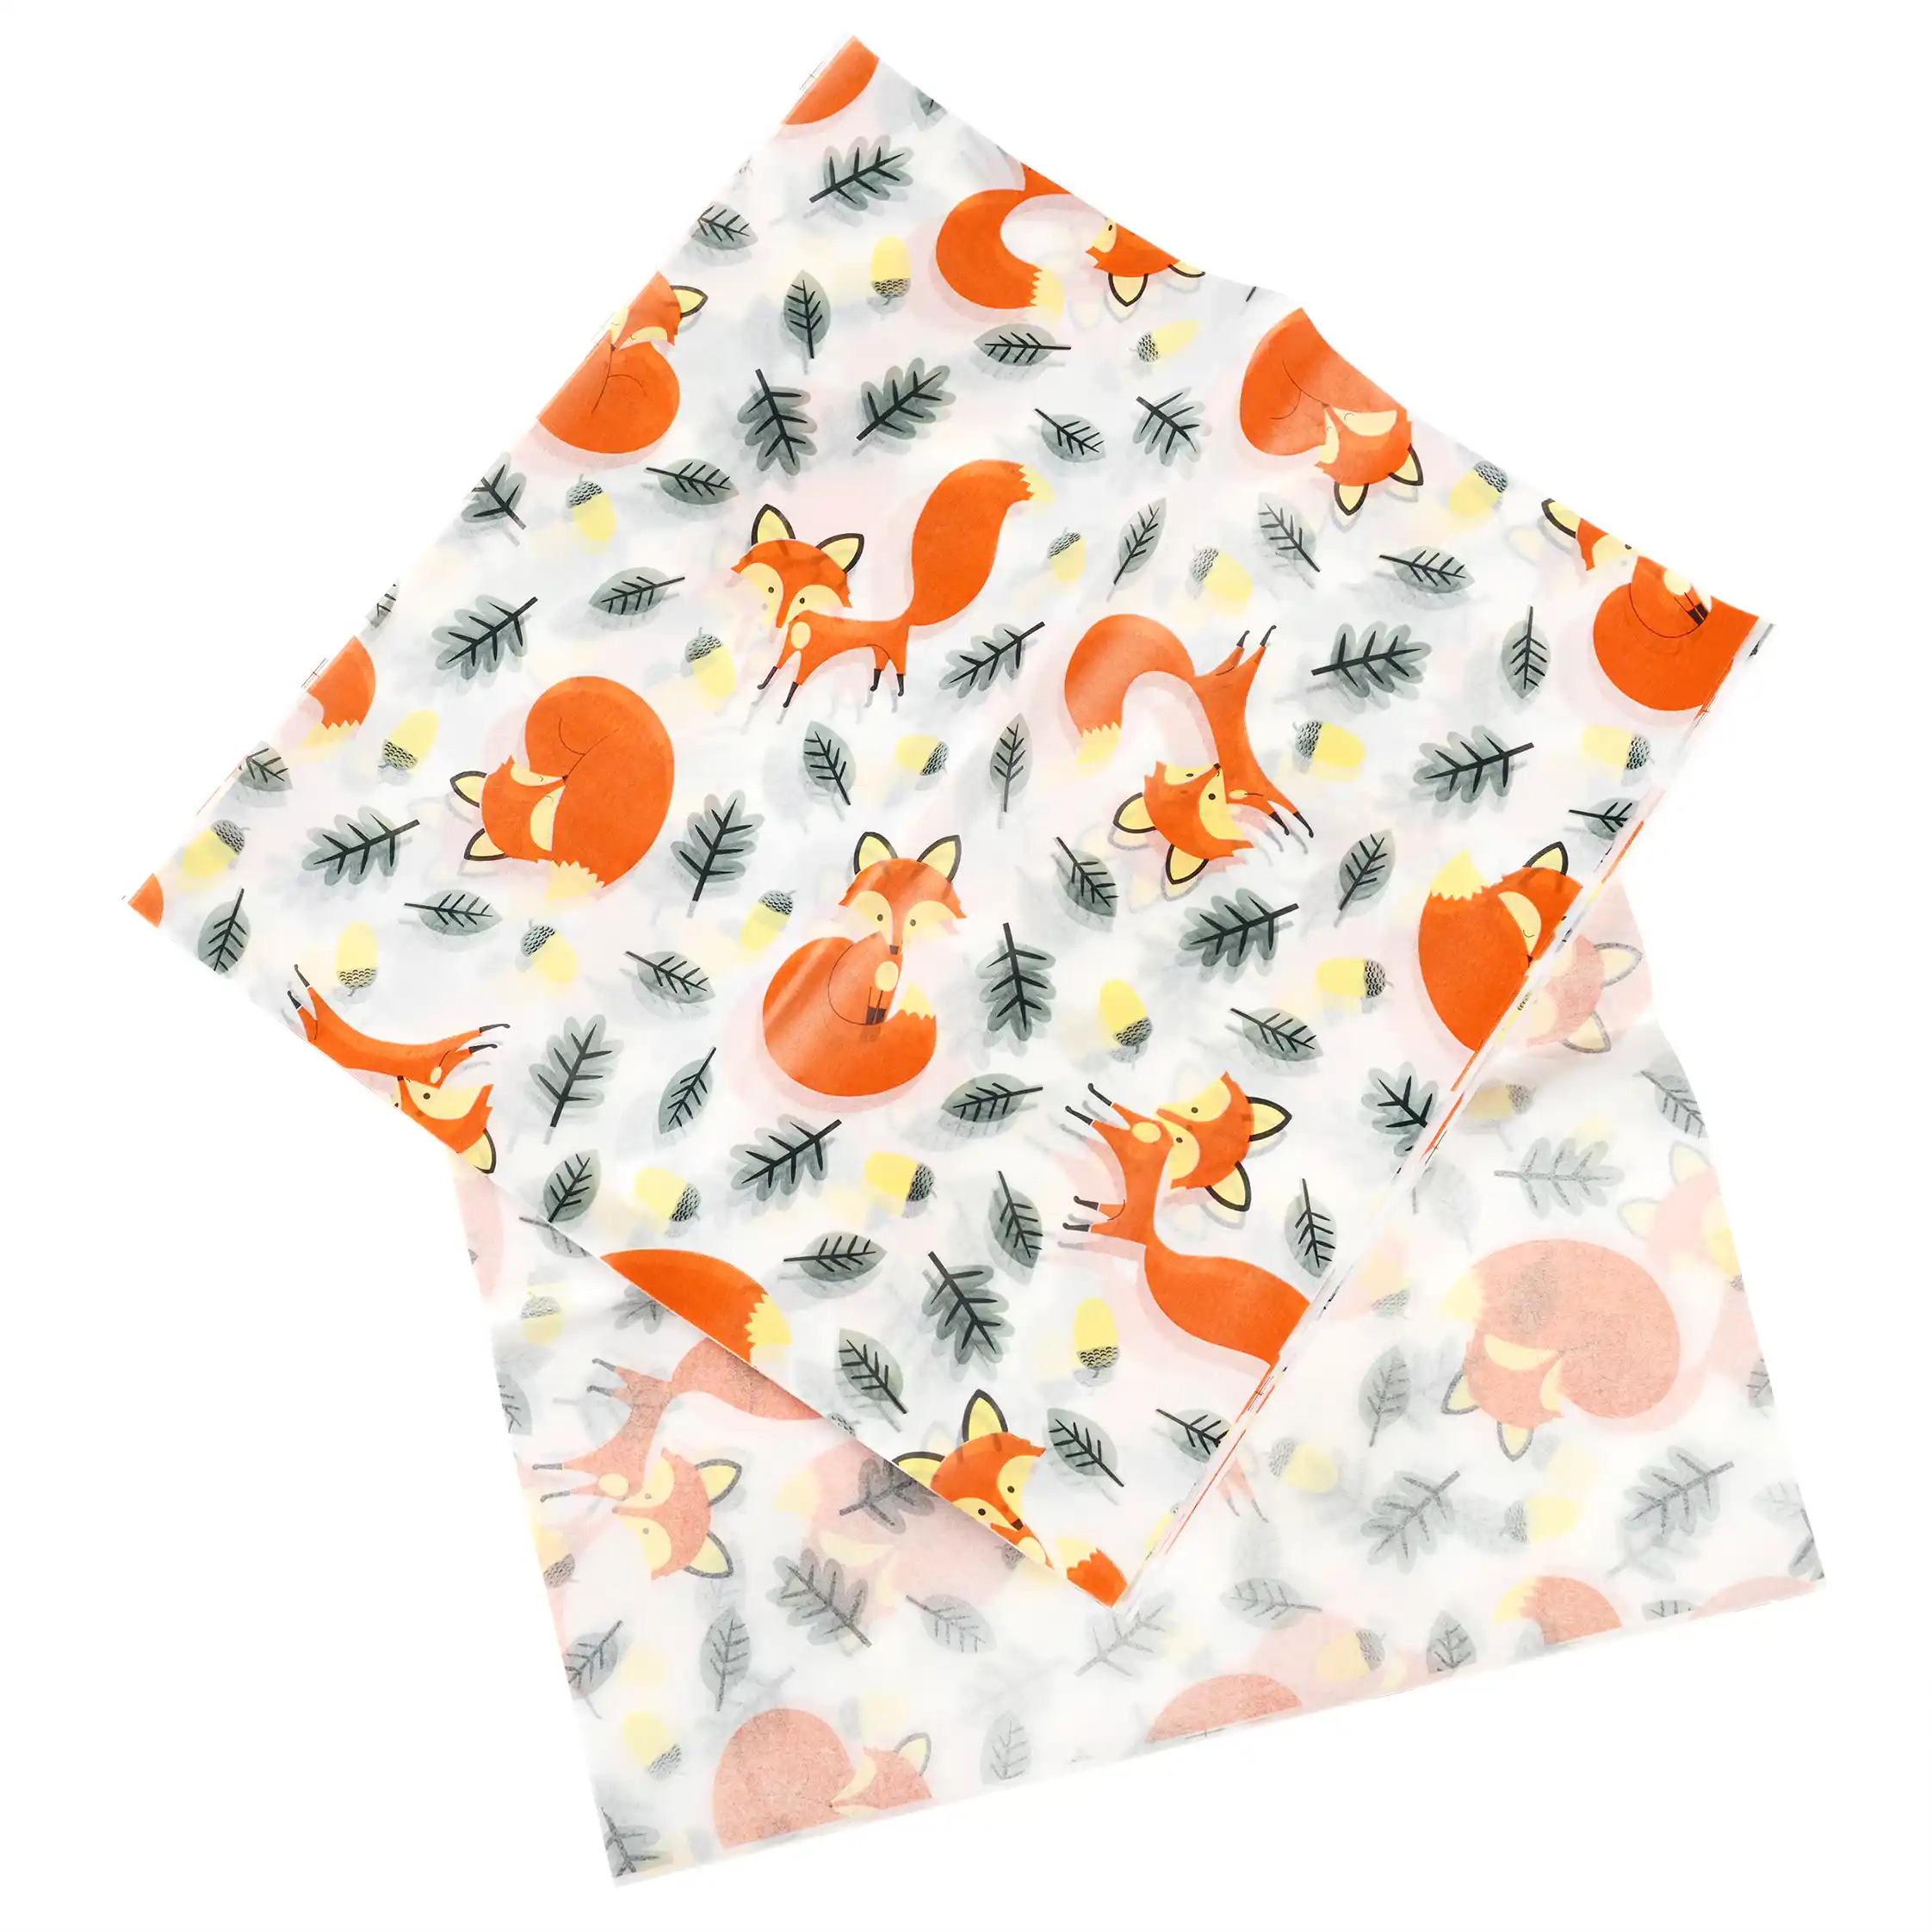 30 sheets greaseproof paper - rusty the fox